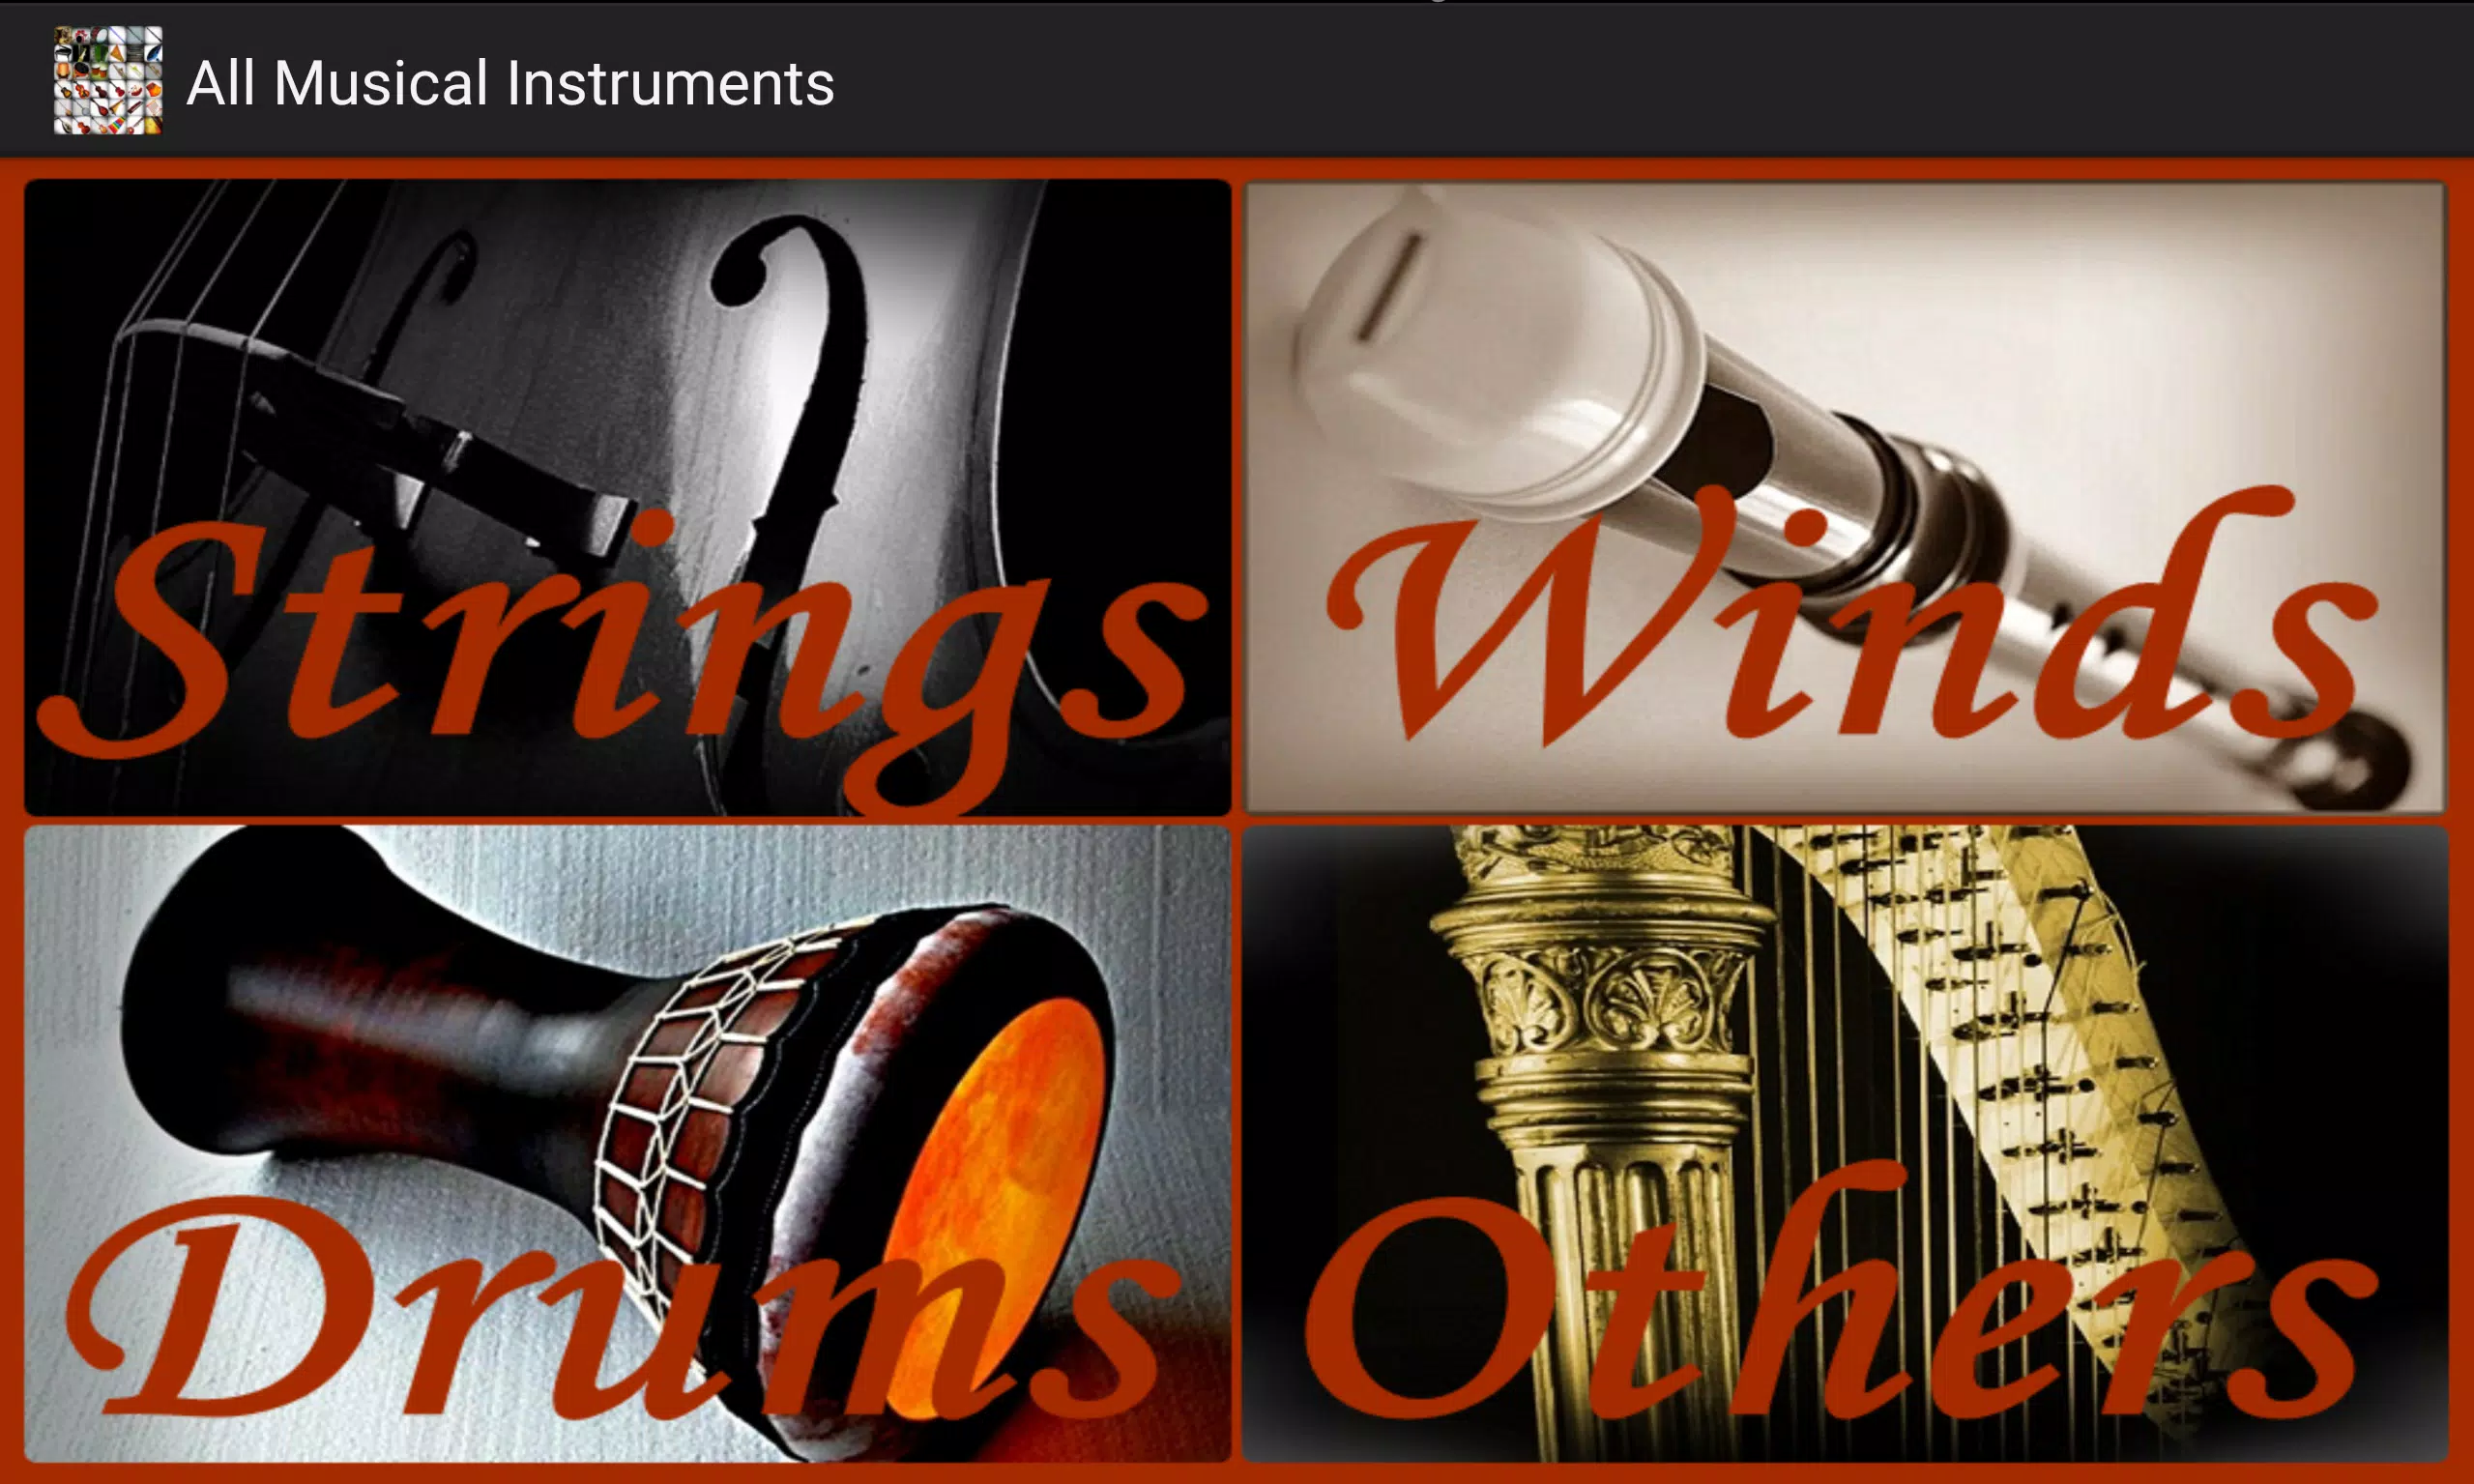 All Musical Instruments for Android - APK Download